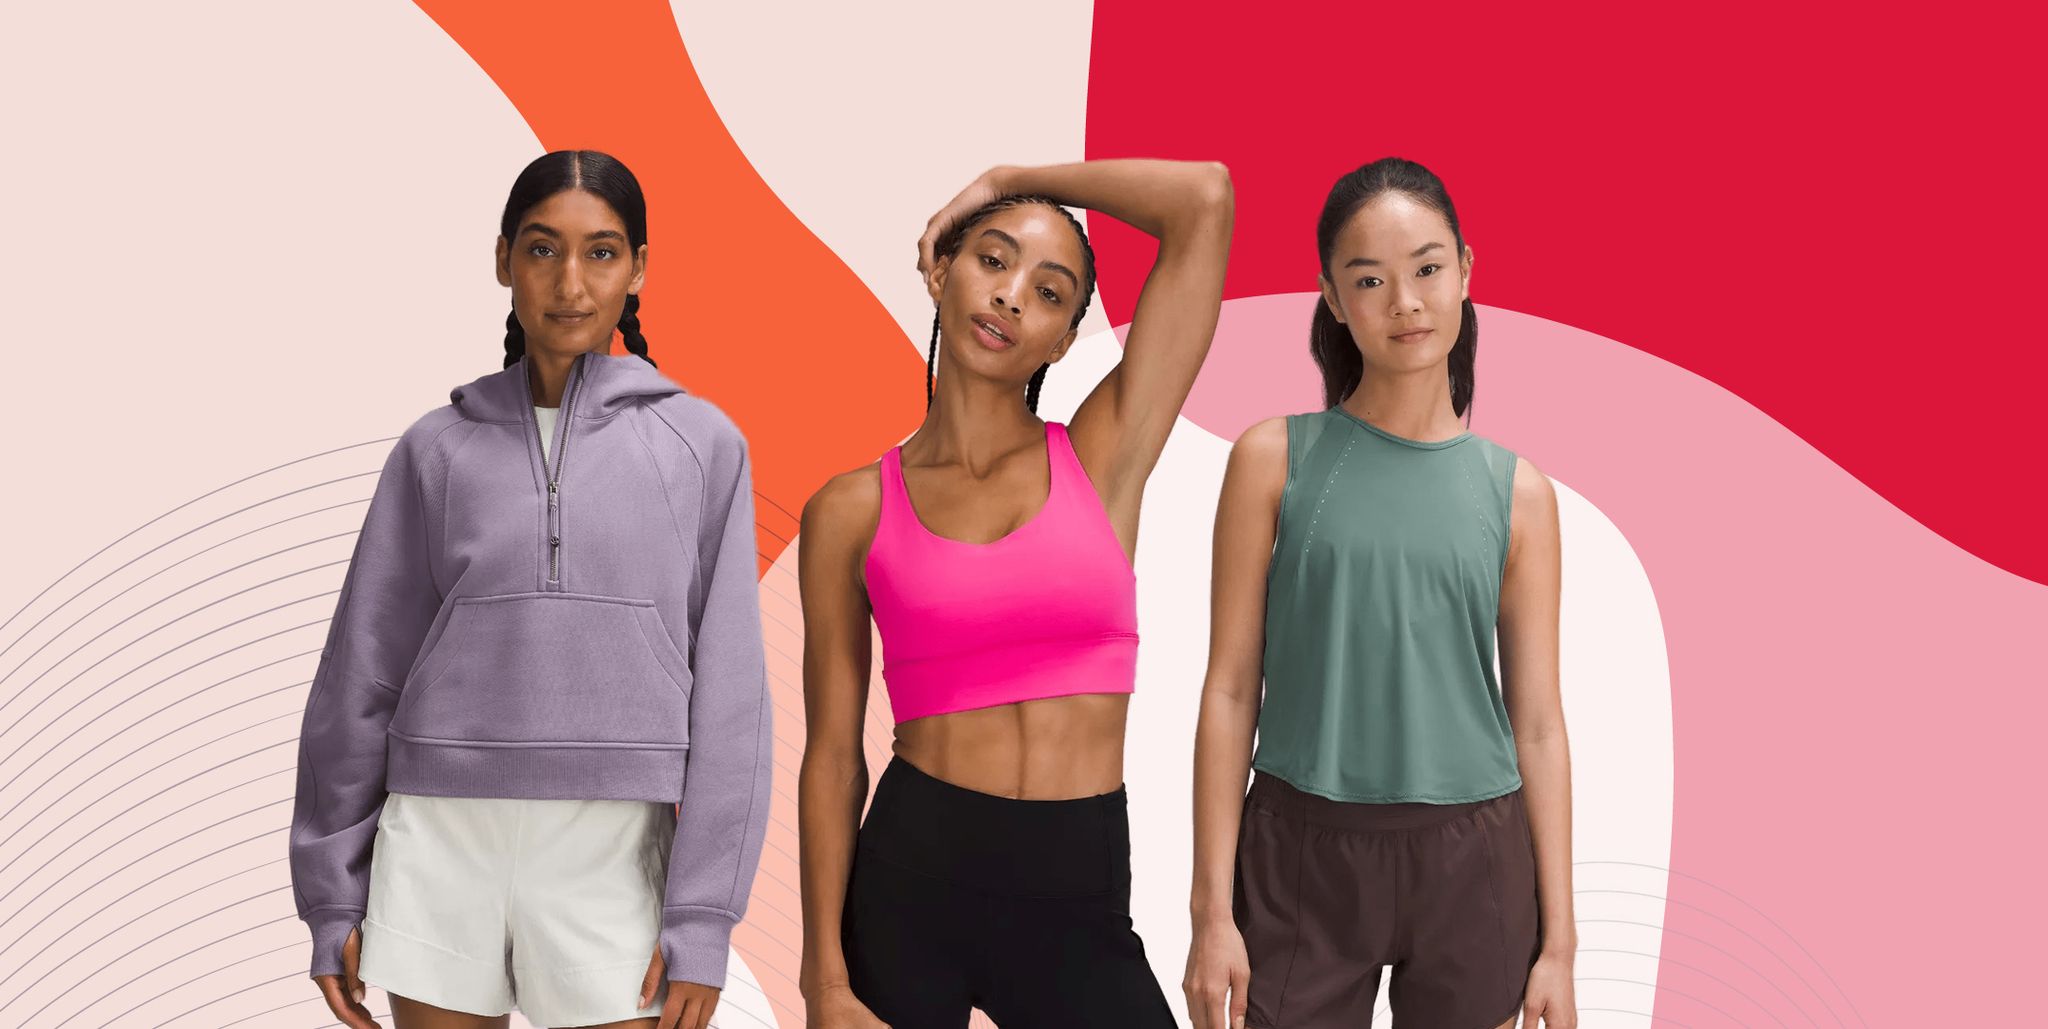 lululemon UK: Early access: We Made Too Much is back.